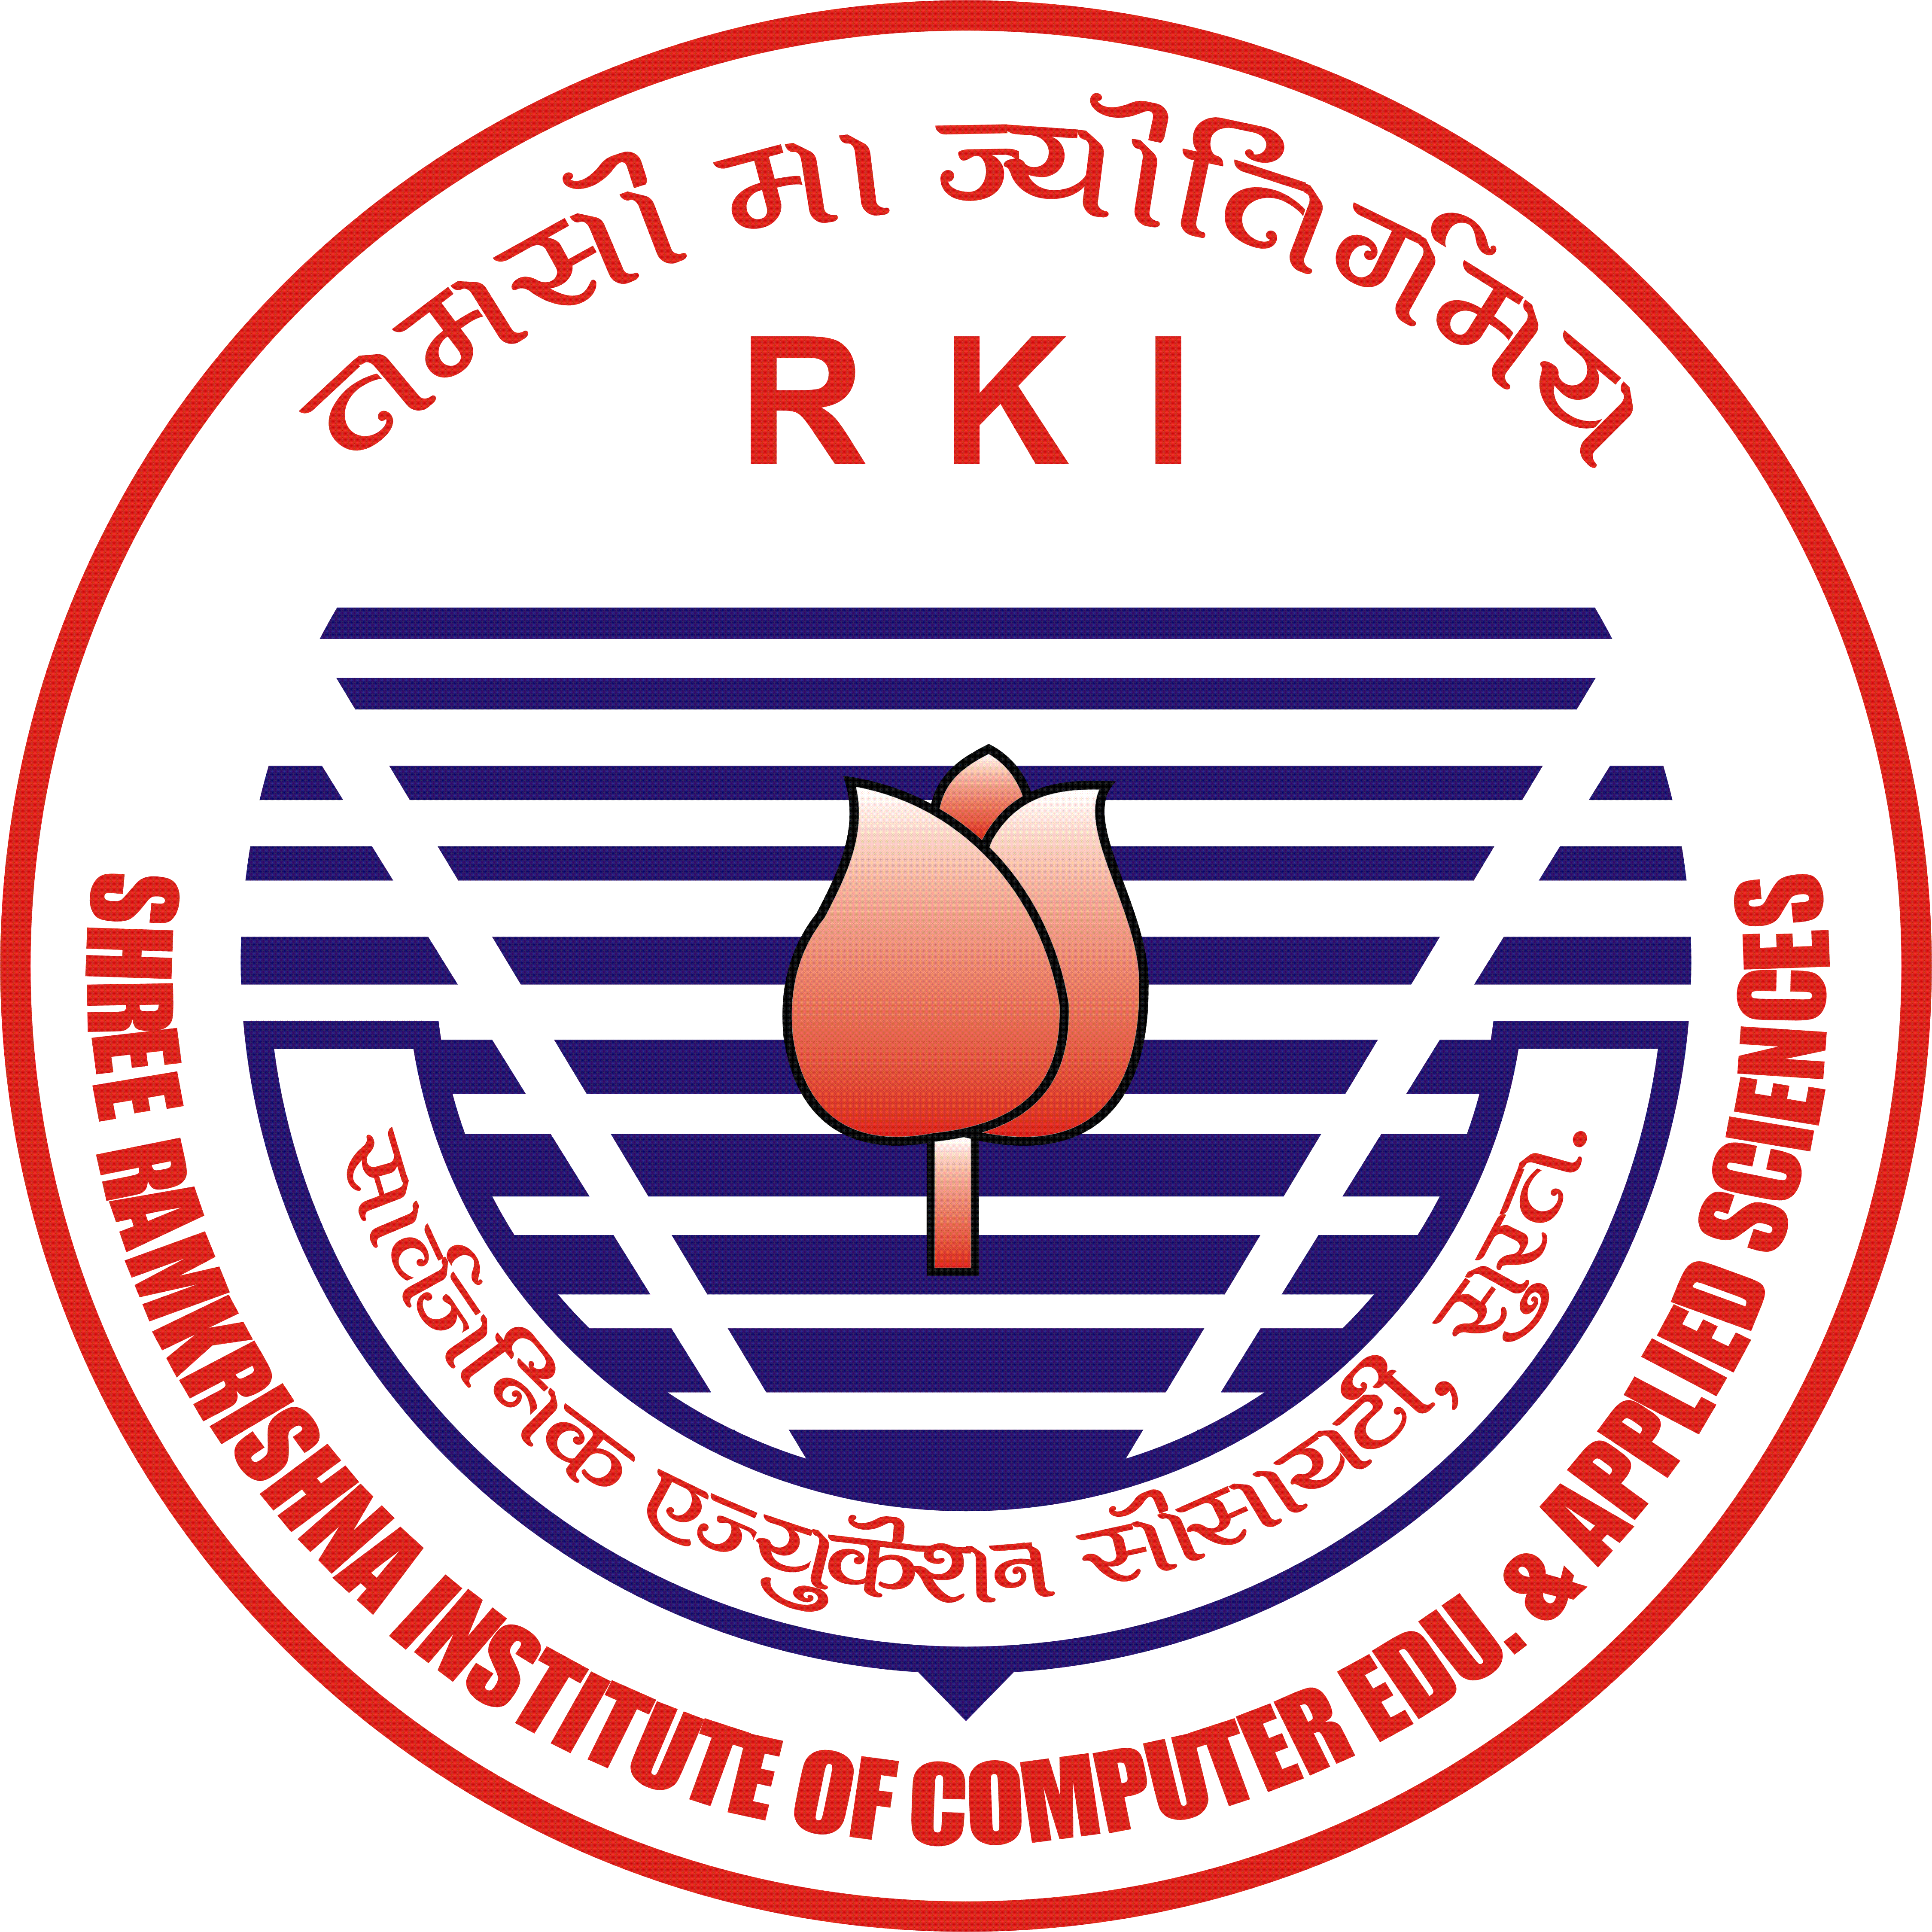 SHREE RAMKRISHNA INSTITUTE OF COMPUTER EDUCATION AND APPLIED SCIENCES